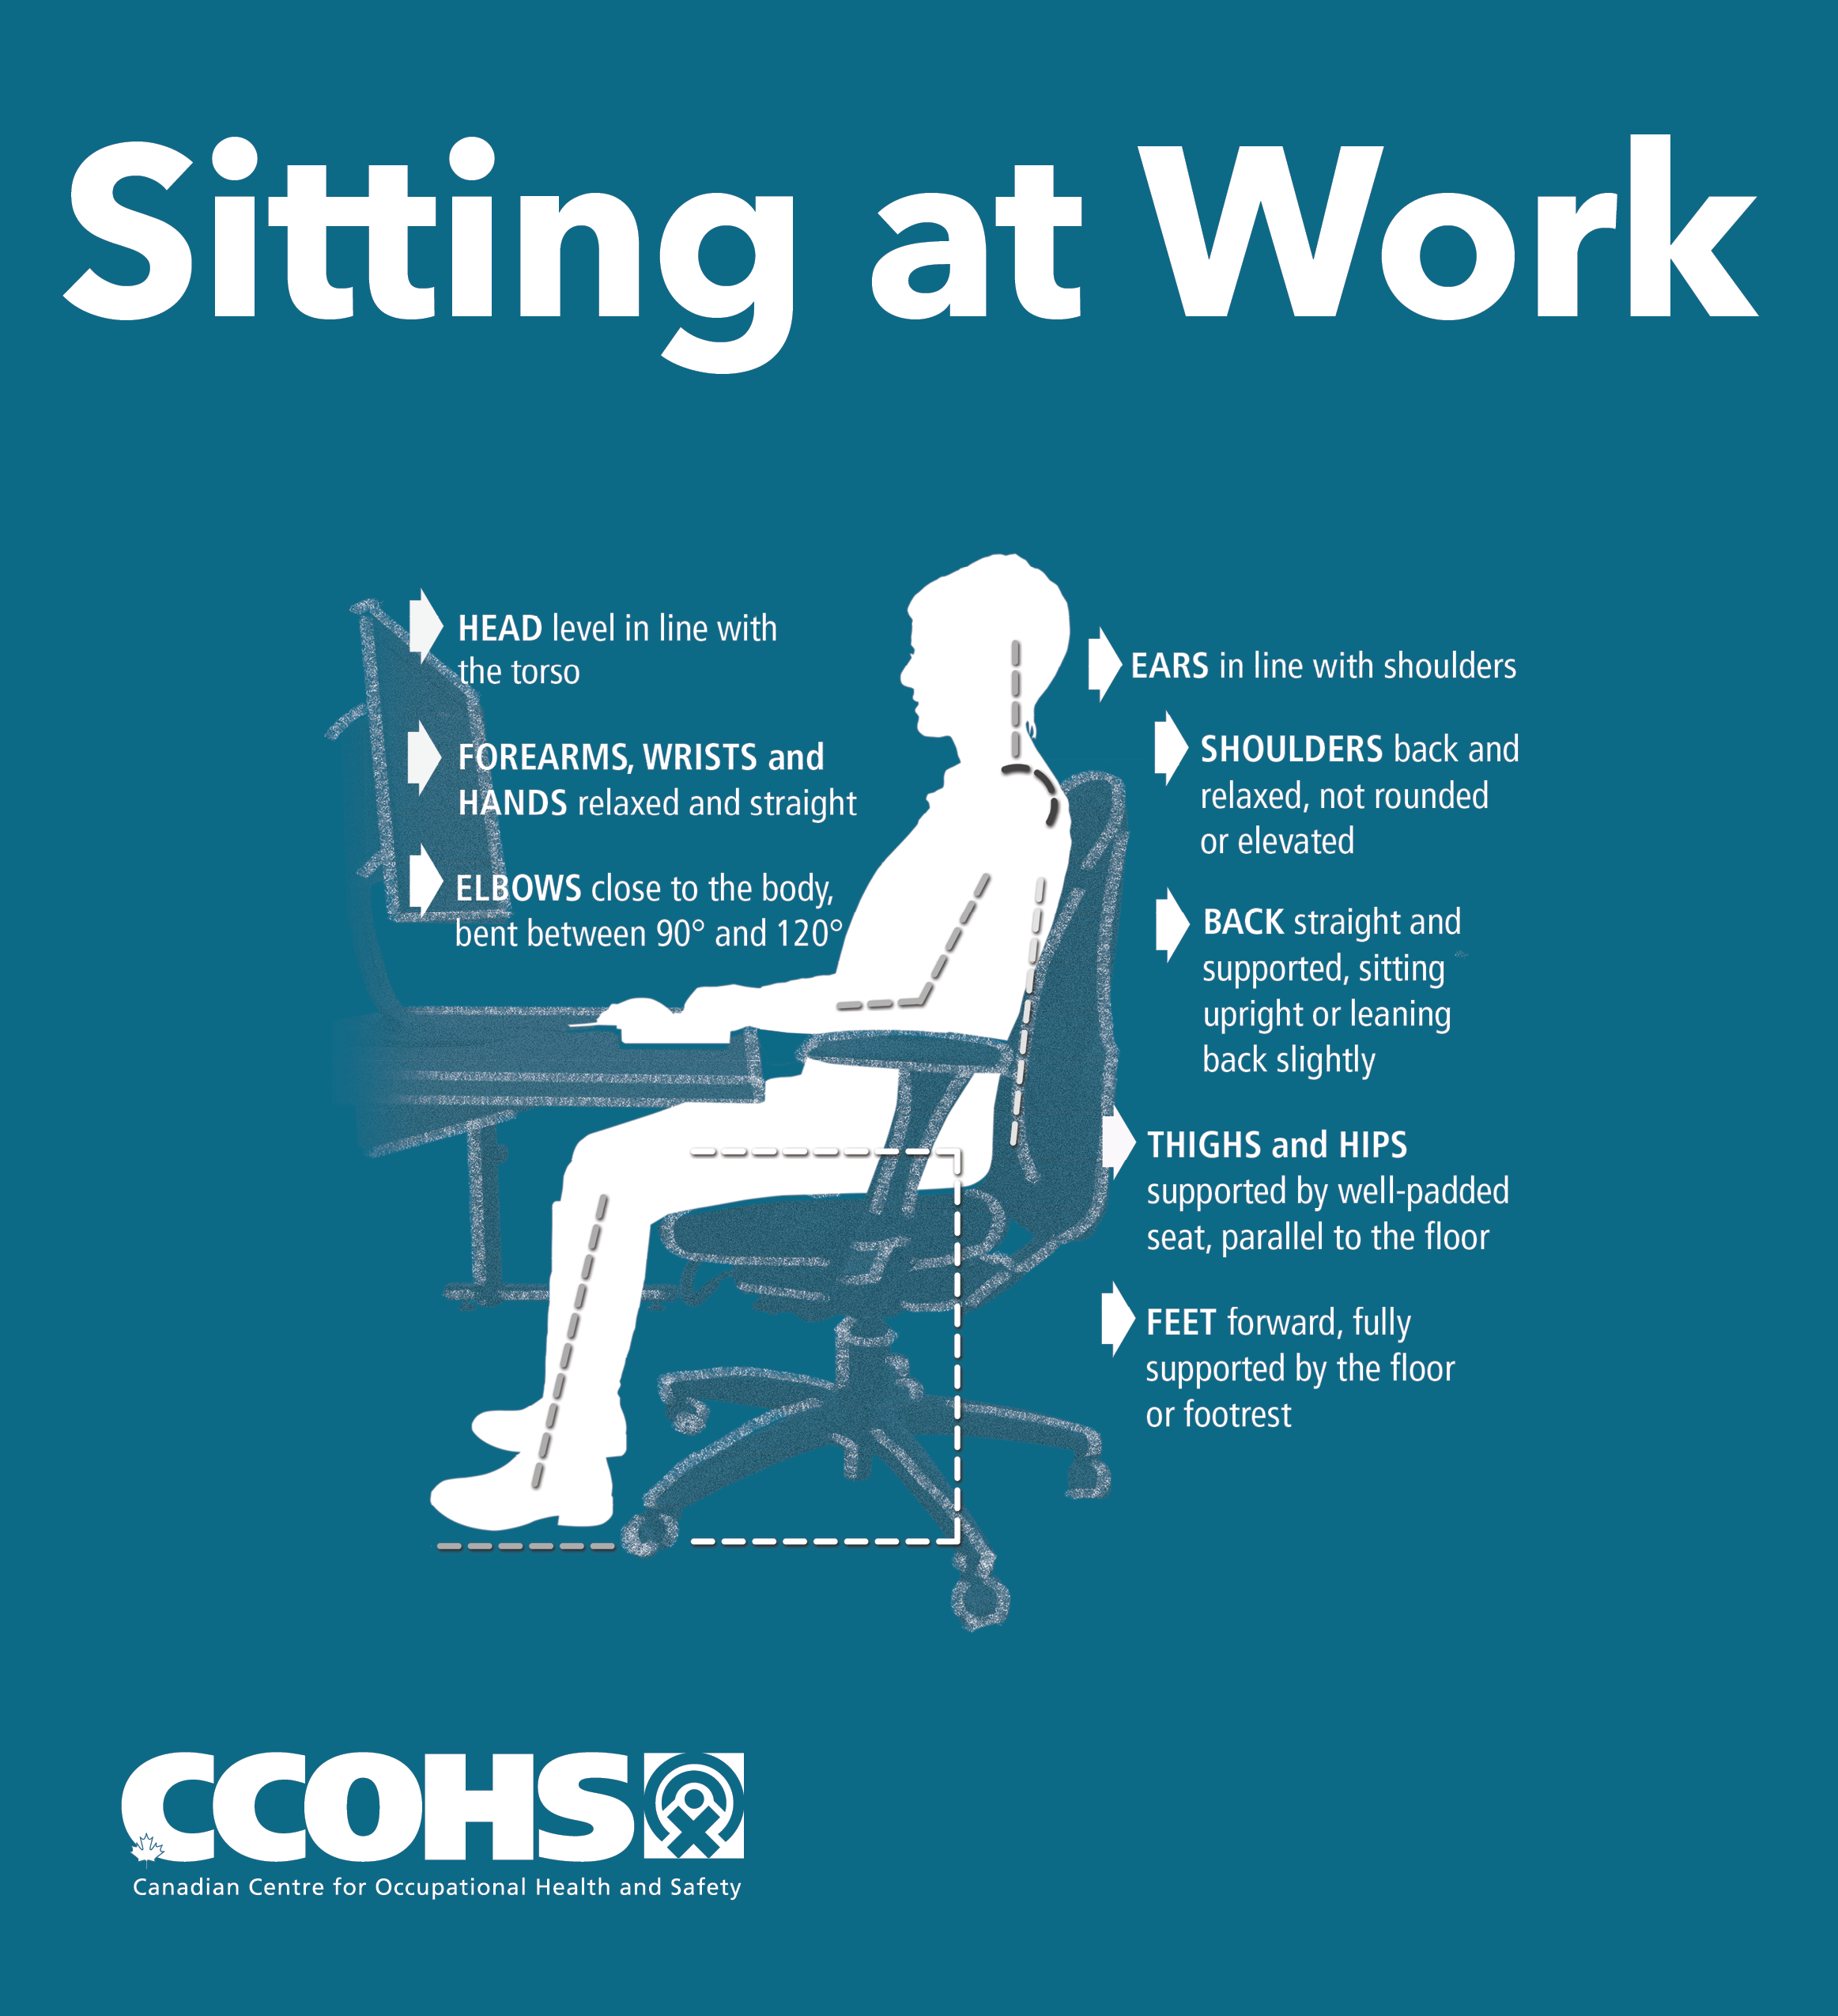 Sitting at Work poster's image